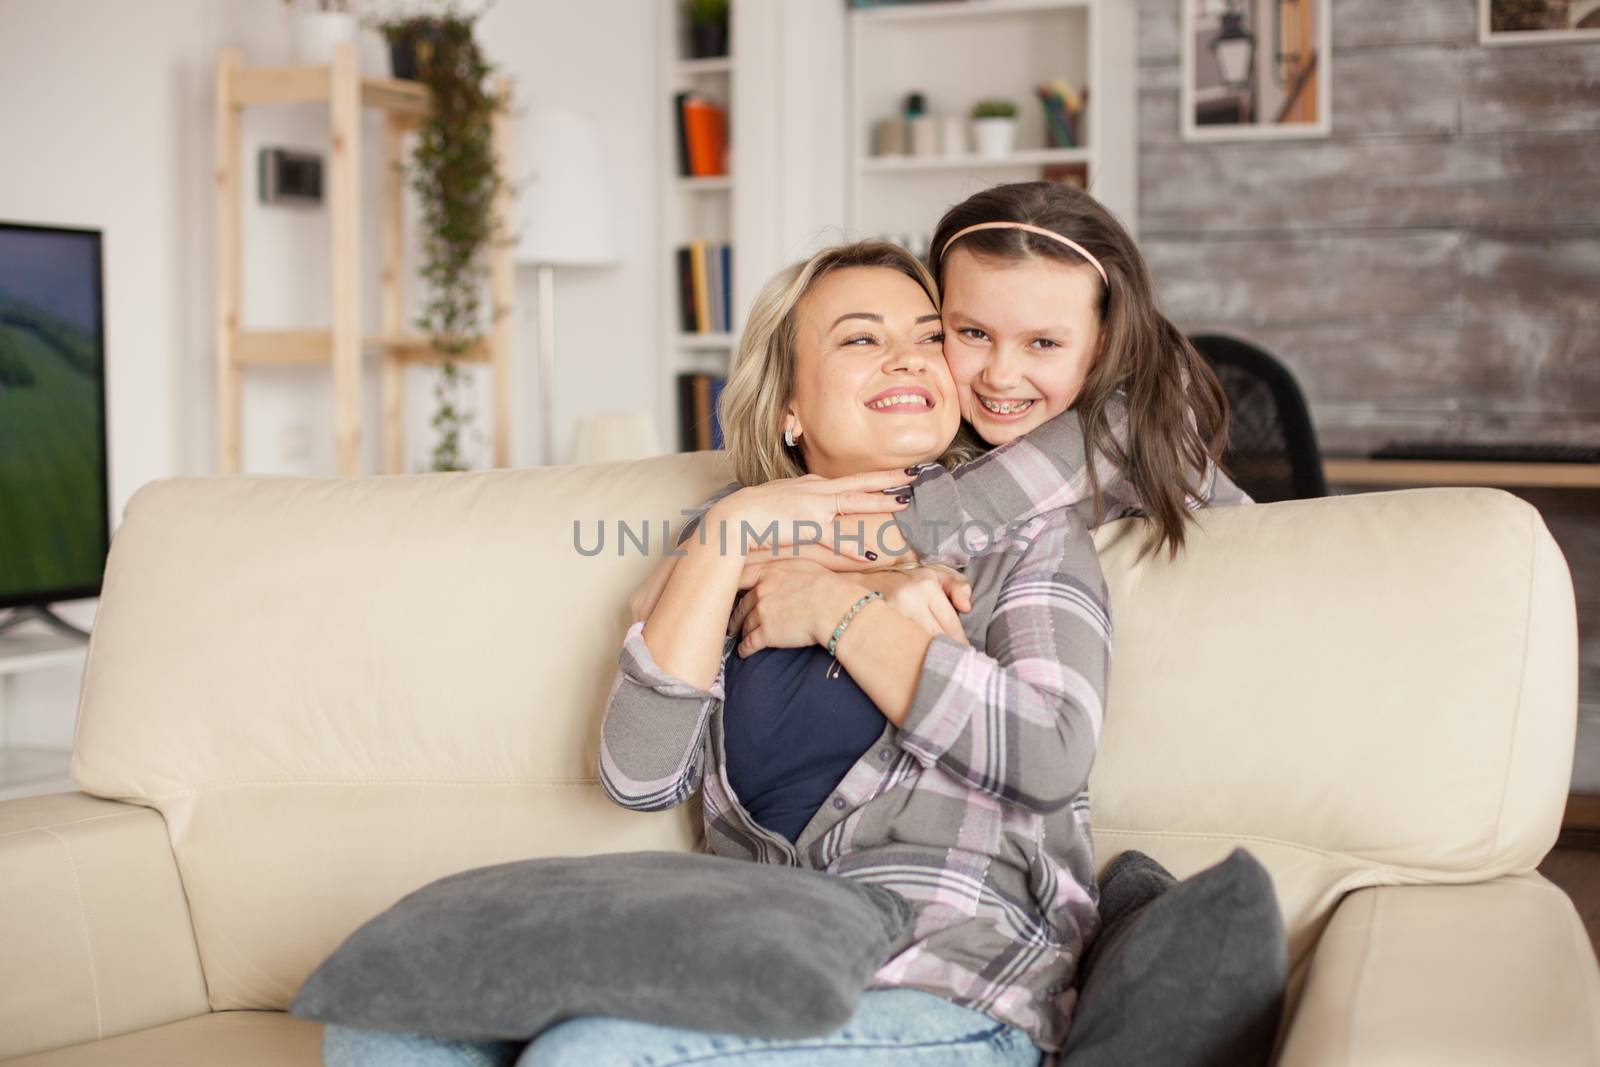 Little girl with braces showing her affection to her mother by hugging her from behind.